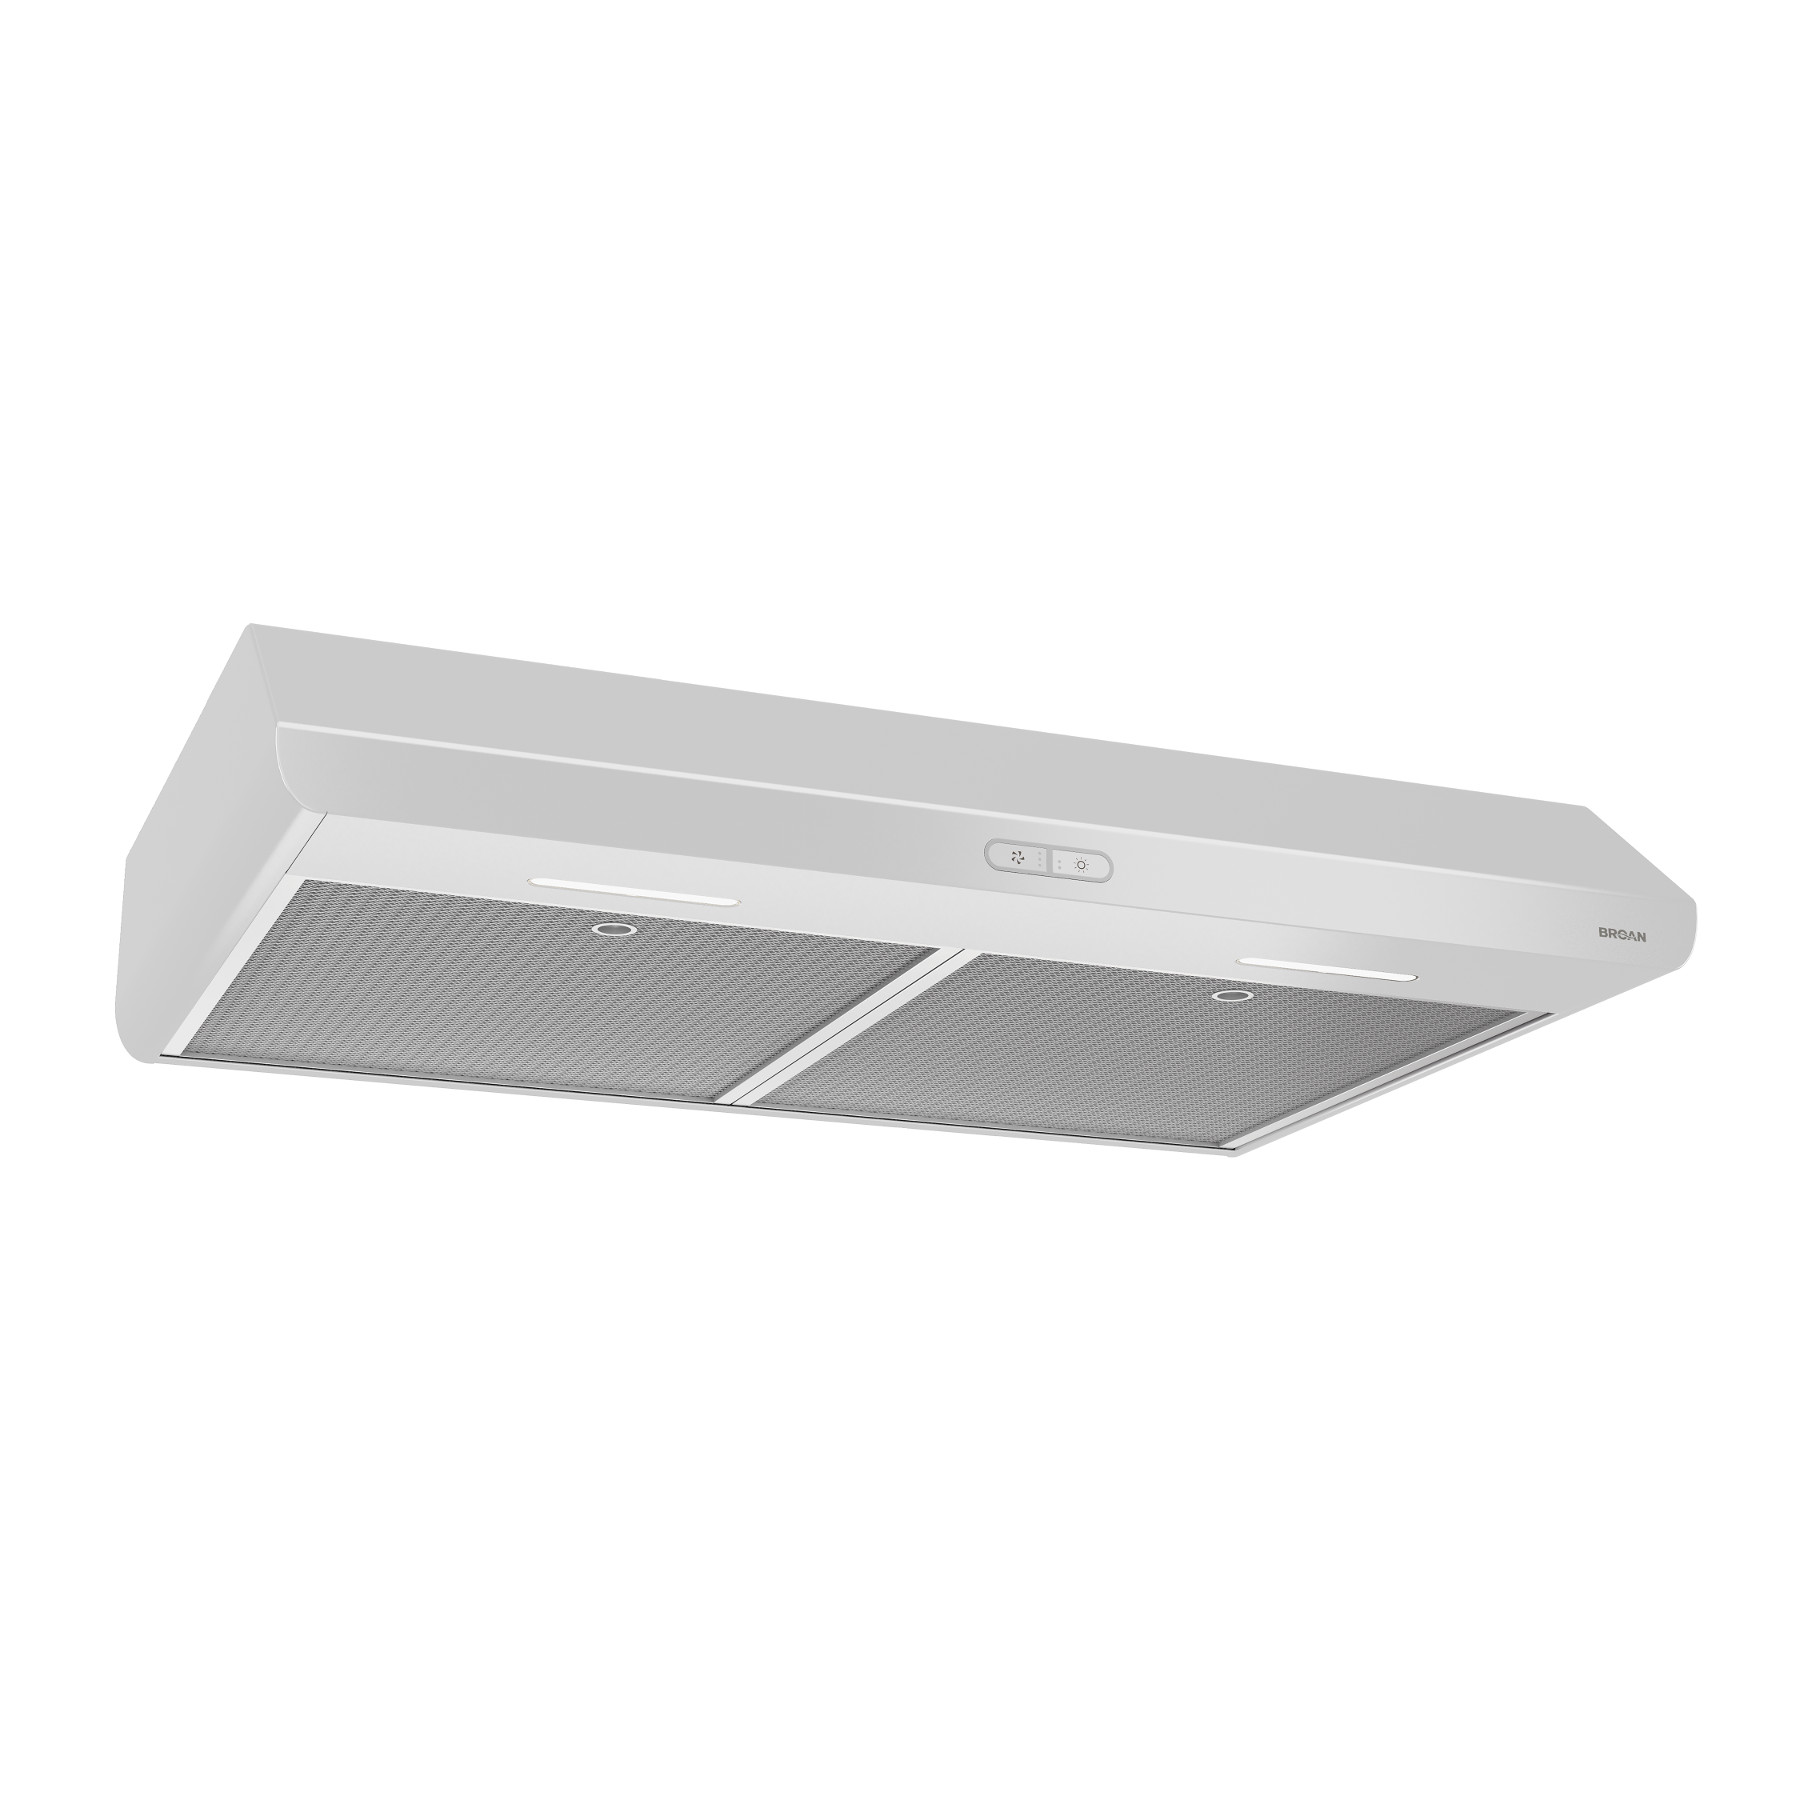 **DISCONTINUED** Broan® 30-Inch Convertible Under-Cabinet Range Hood, 300 Max Blower CFM, White